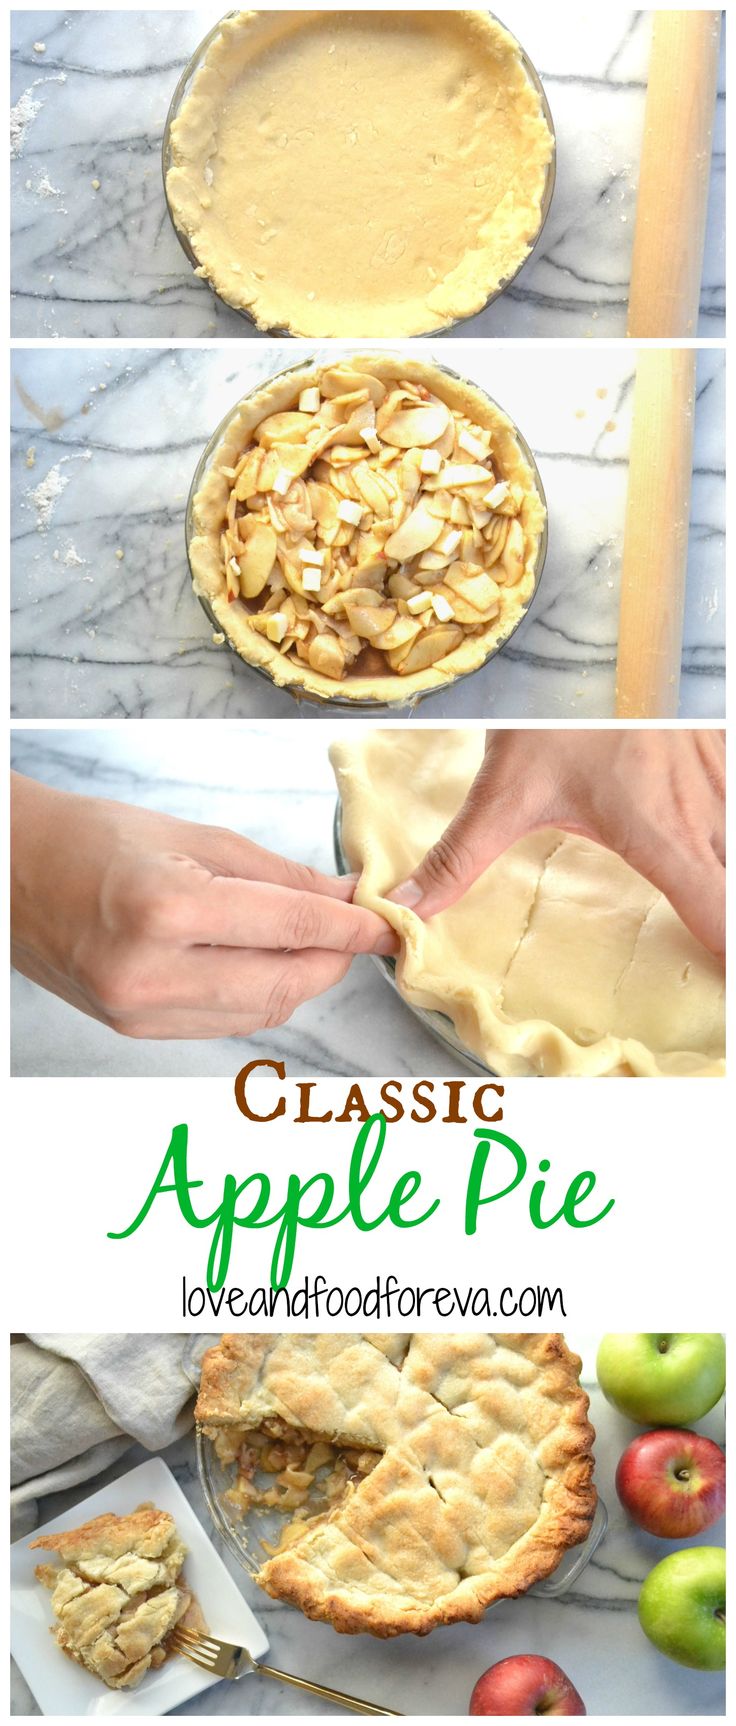 Classic Apple Pie with the most buttery, flaky crust EVER!